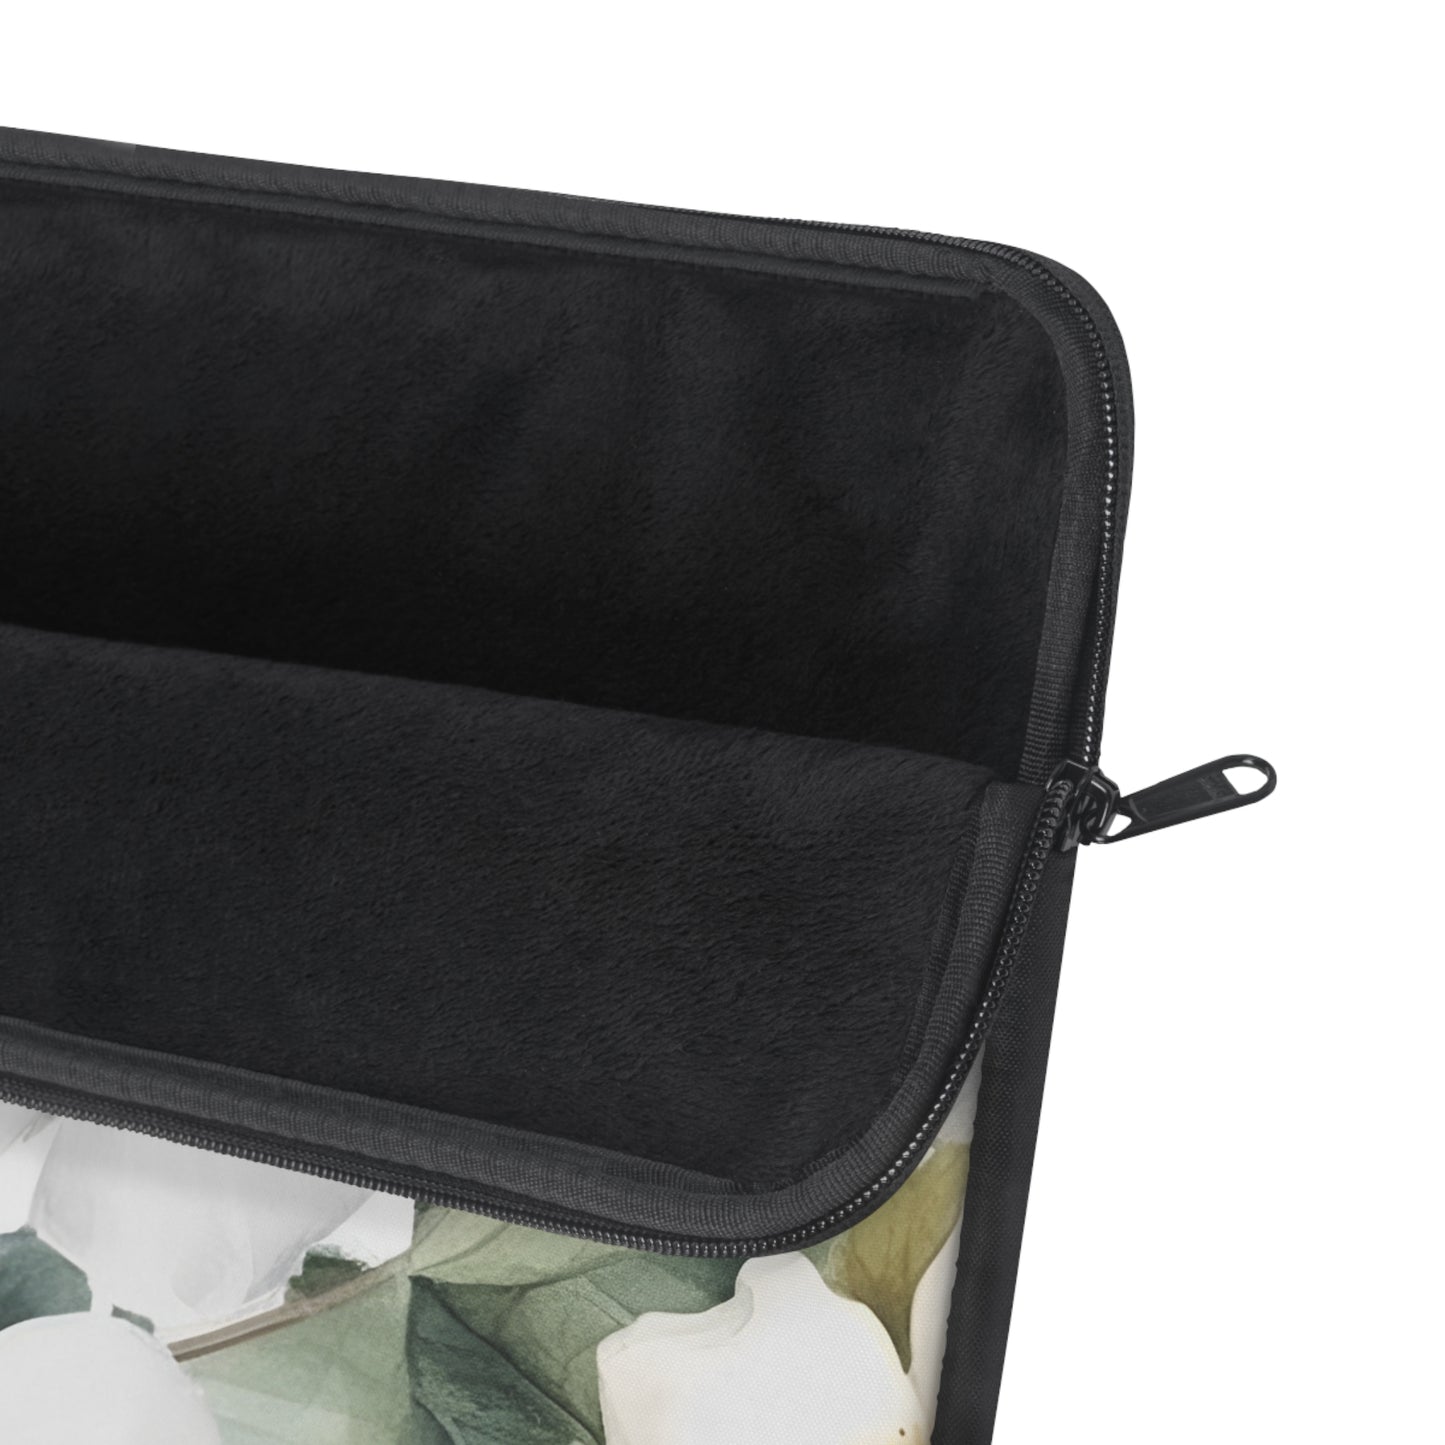 White Floral Laptop Sleeve